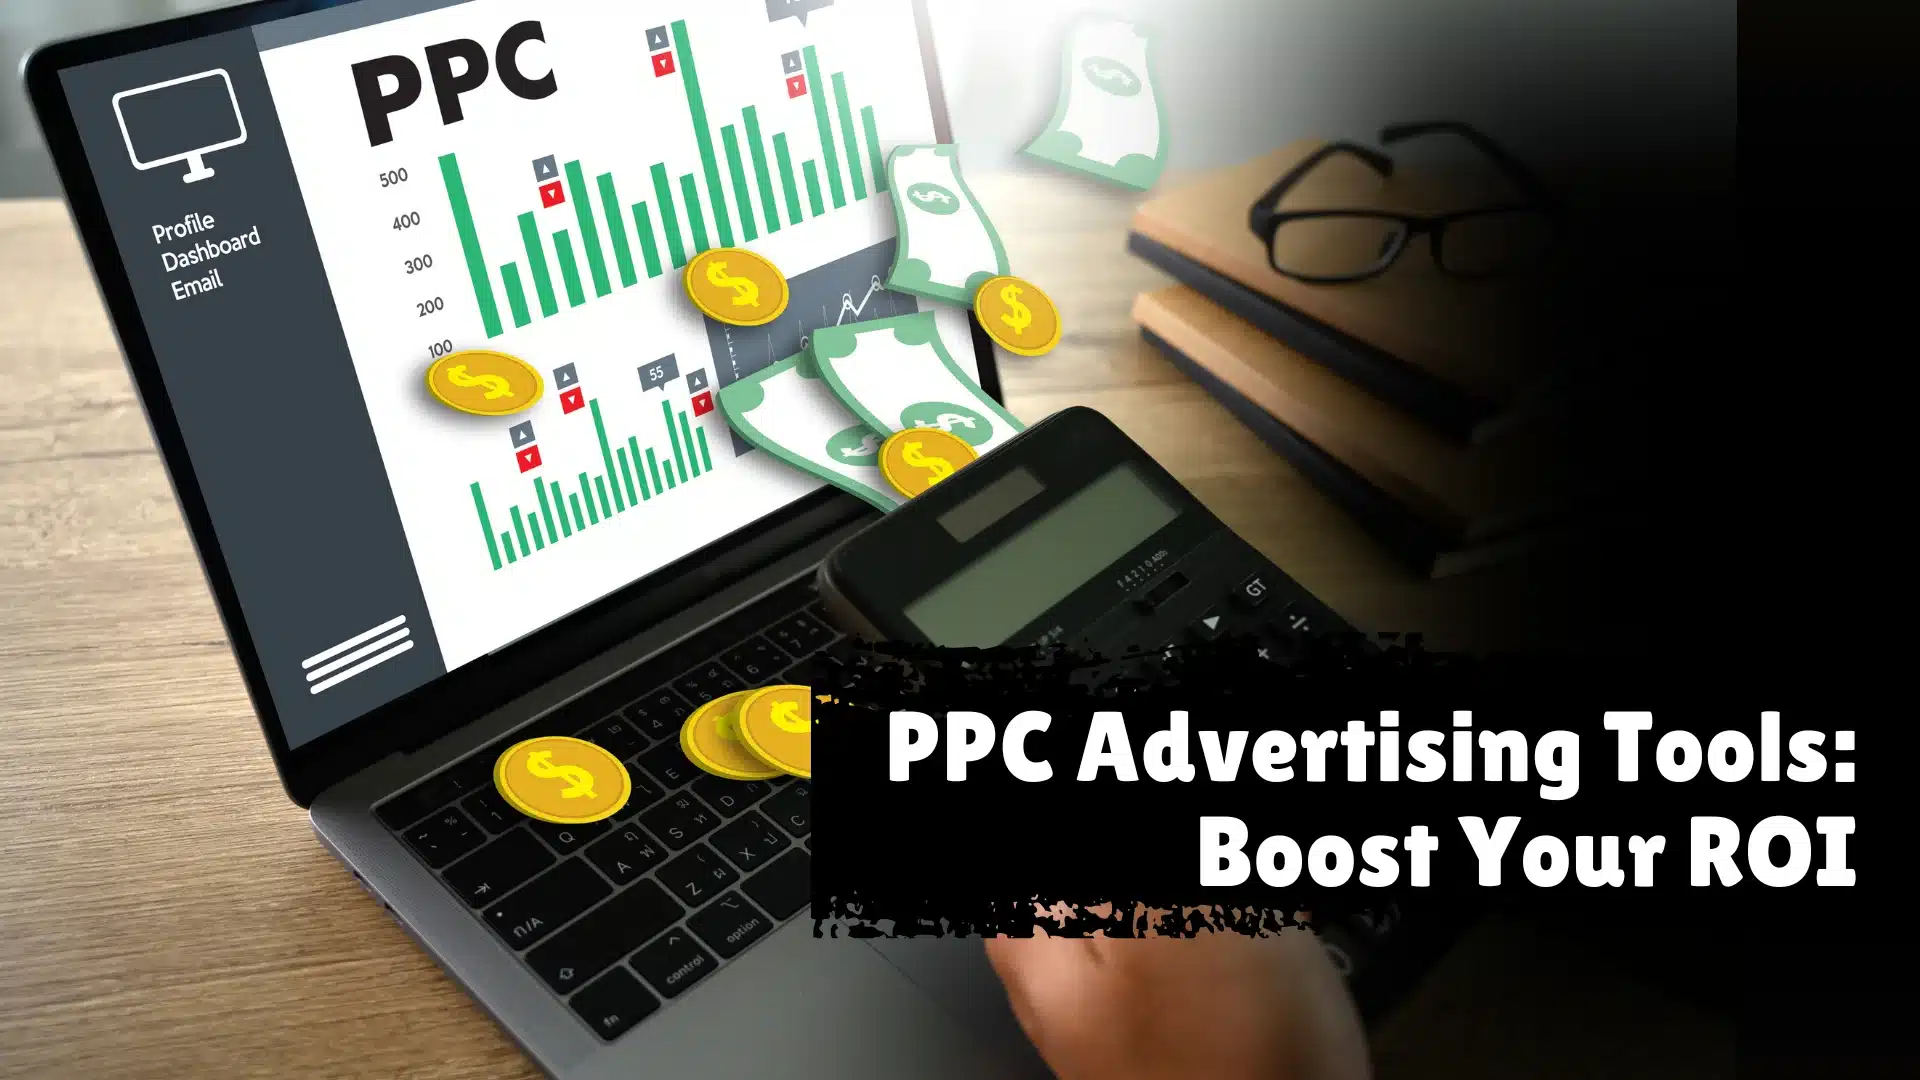 PPC Advertising Tools: Boost Your ROI with These Top Picks